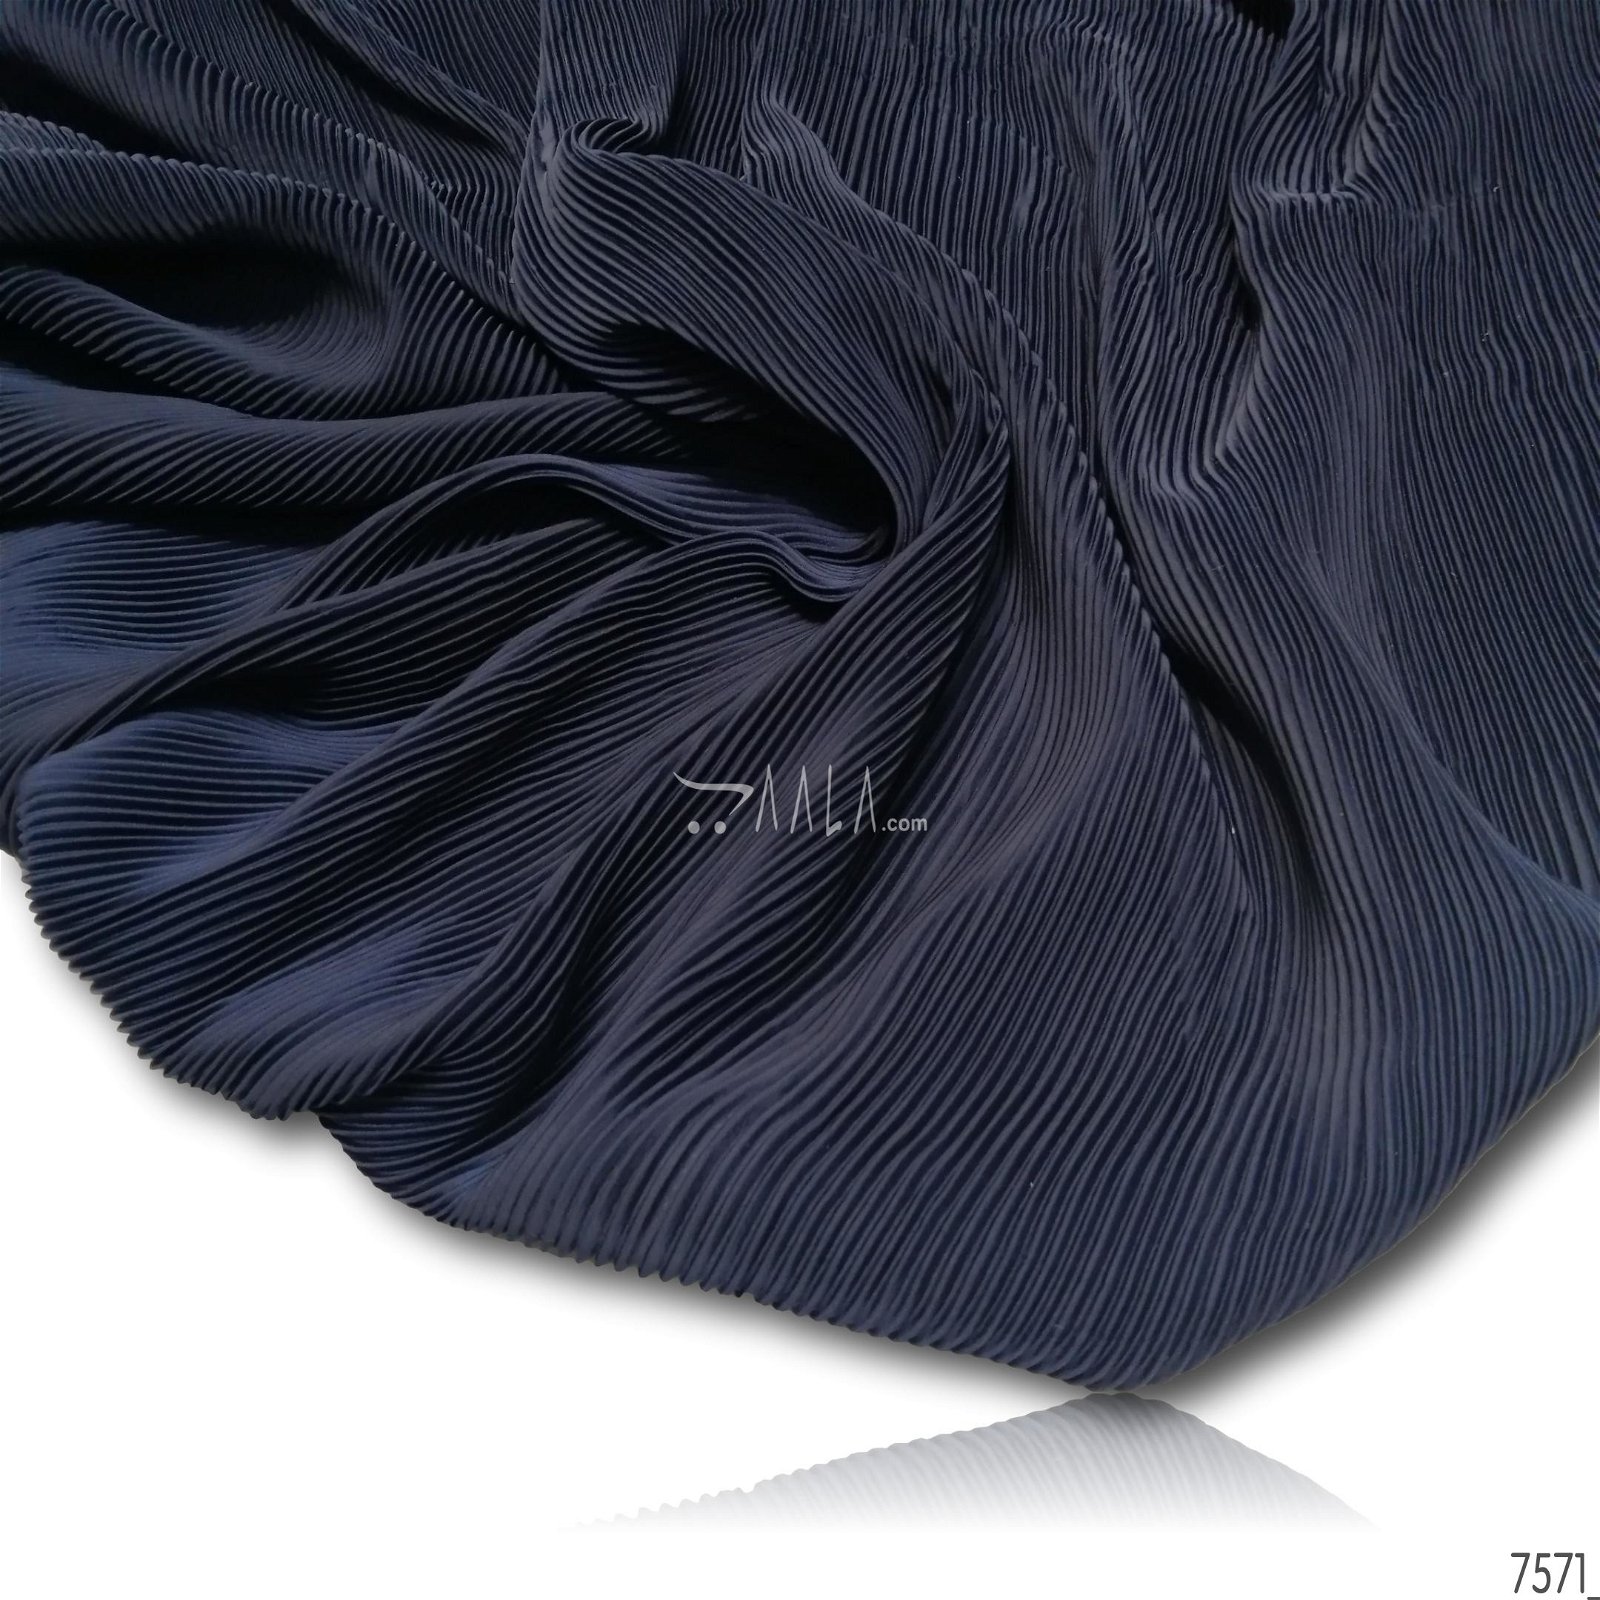 Pleated Satin-Georgette Poly-ester 44-Inches BLUE Per-Metre #7571
